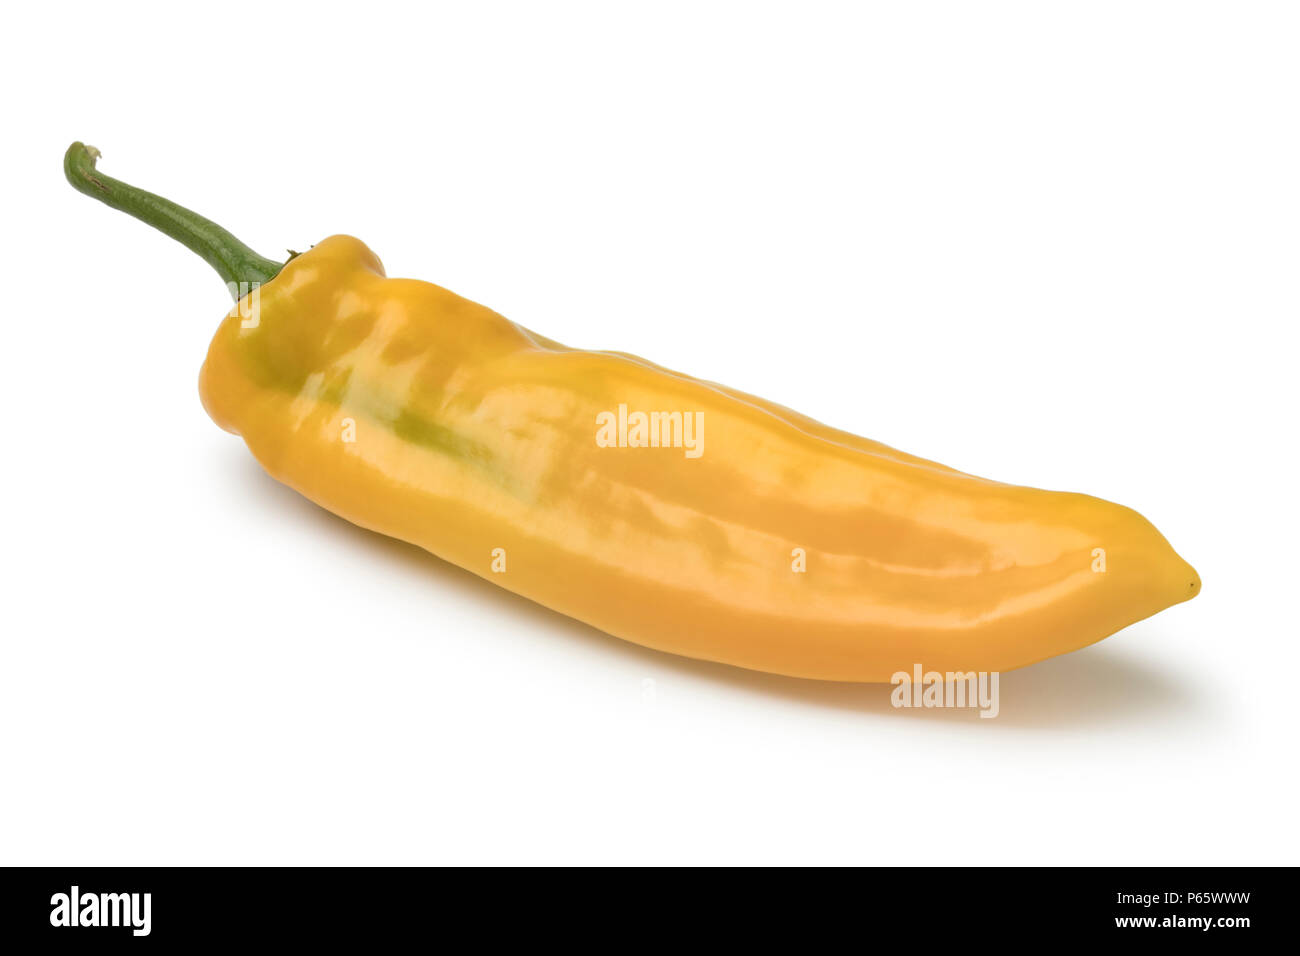 Single fresh yellow pointed pepper isolated on white background Stock Photo